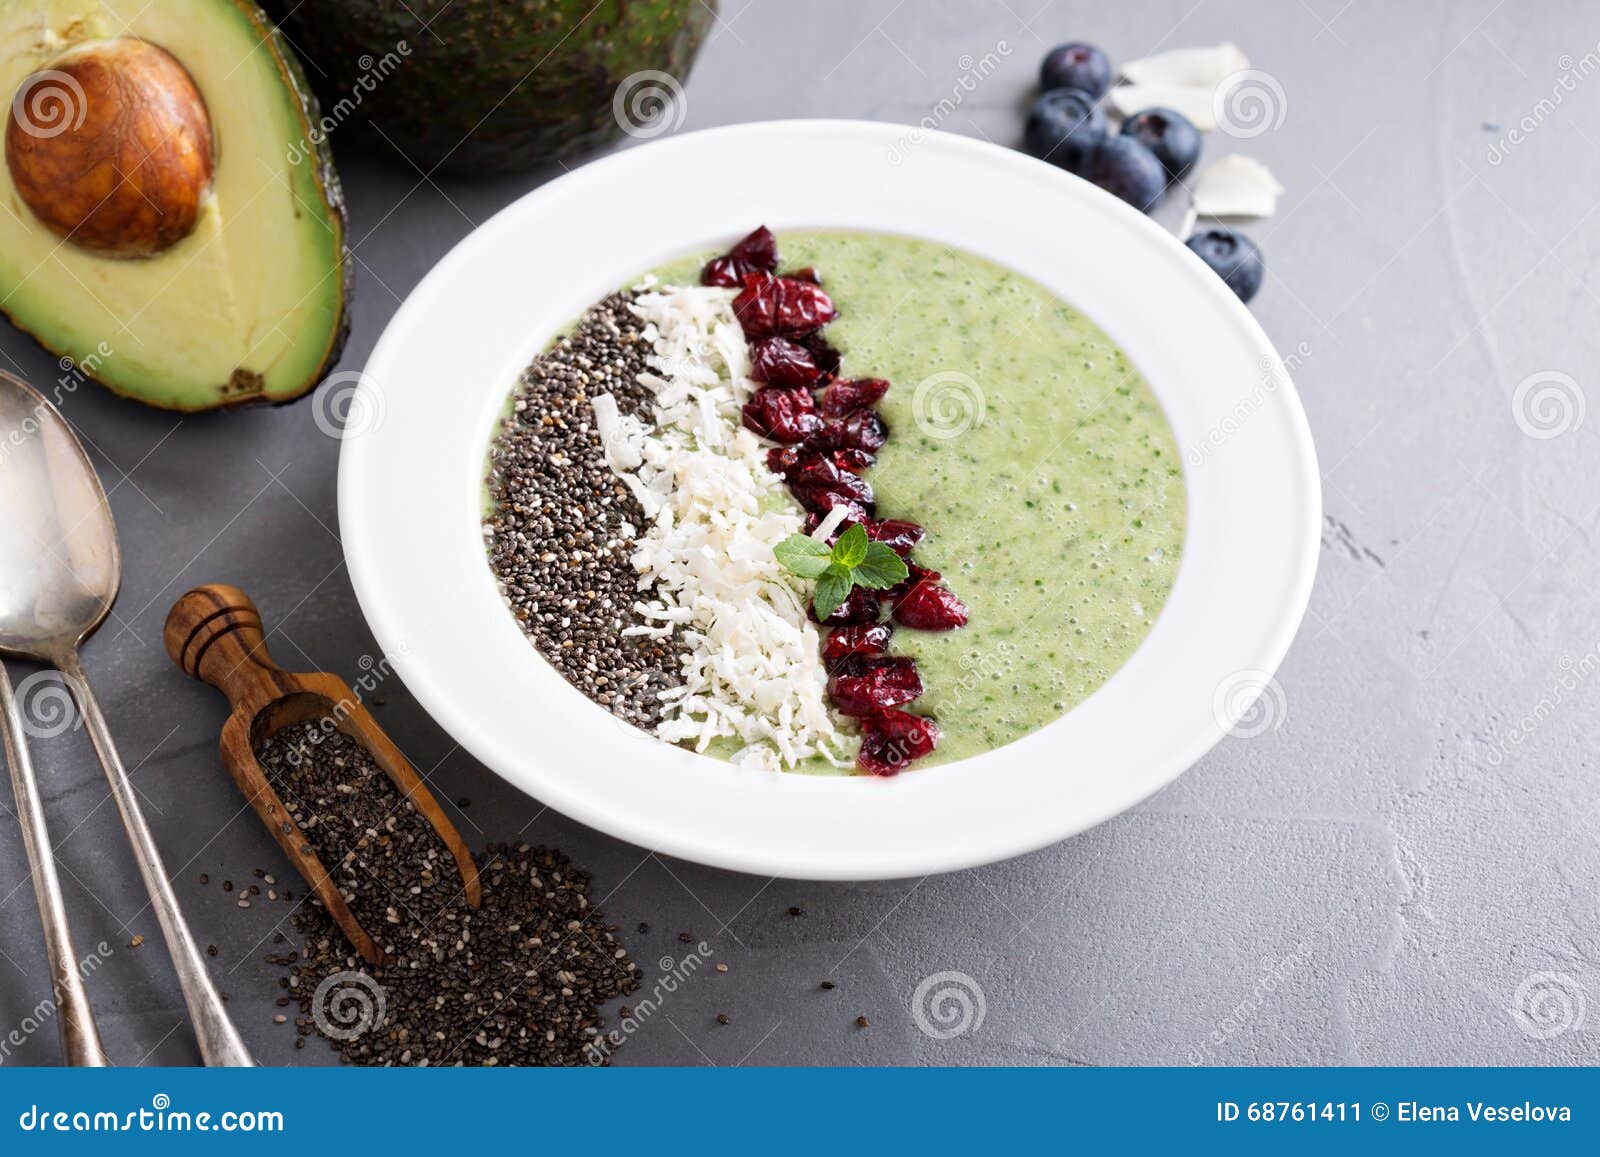 Green Smoothie Bowl with Avocado and Chia Seeds Stock Image - Image of ...